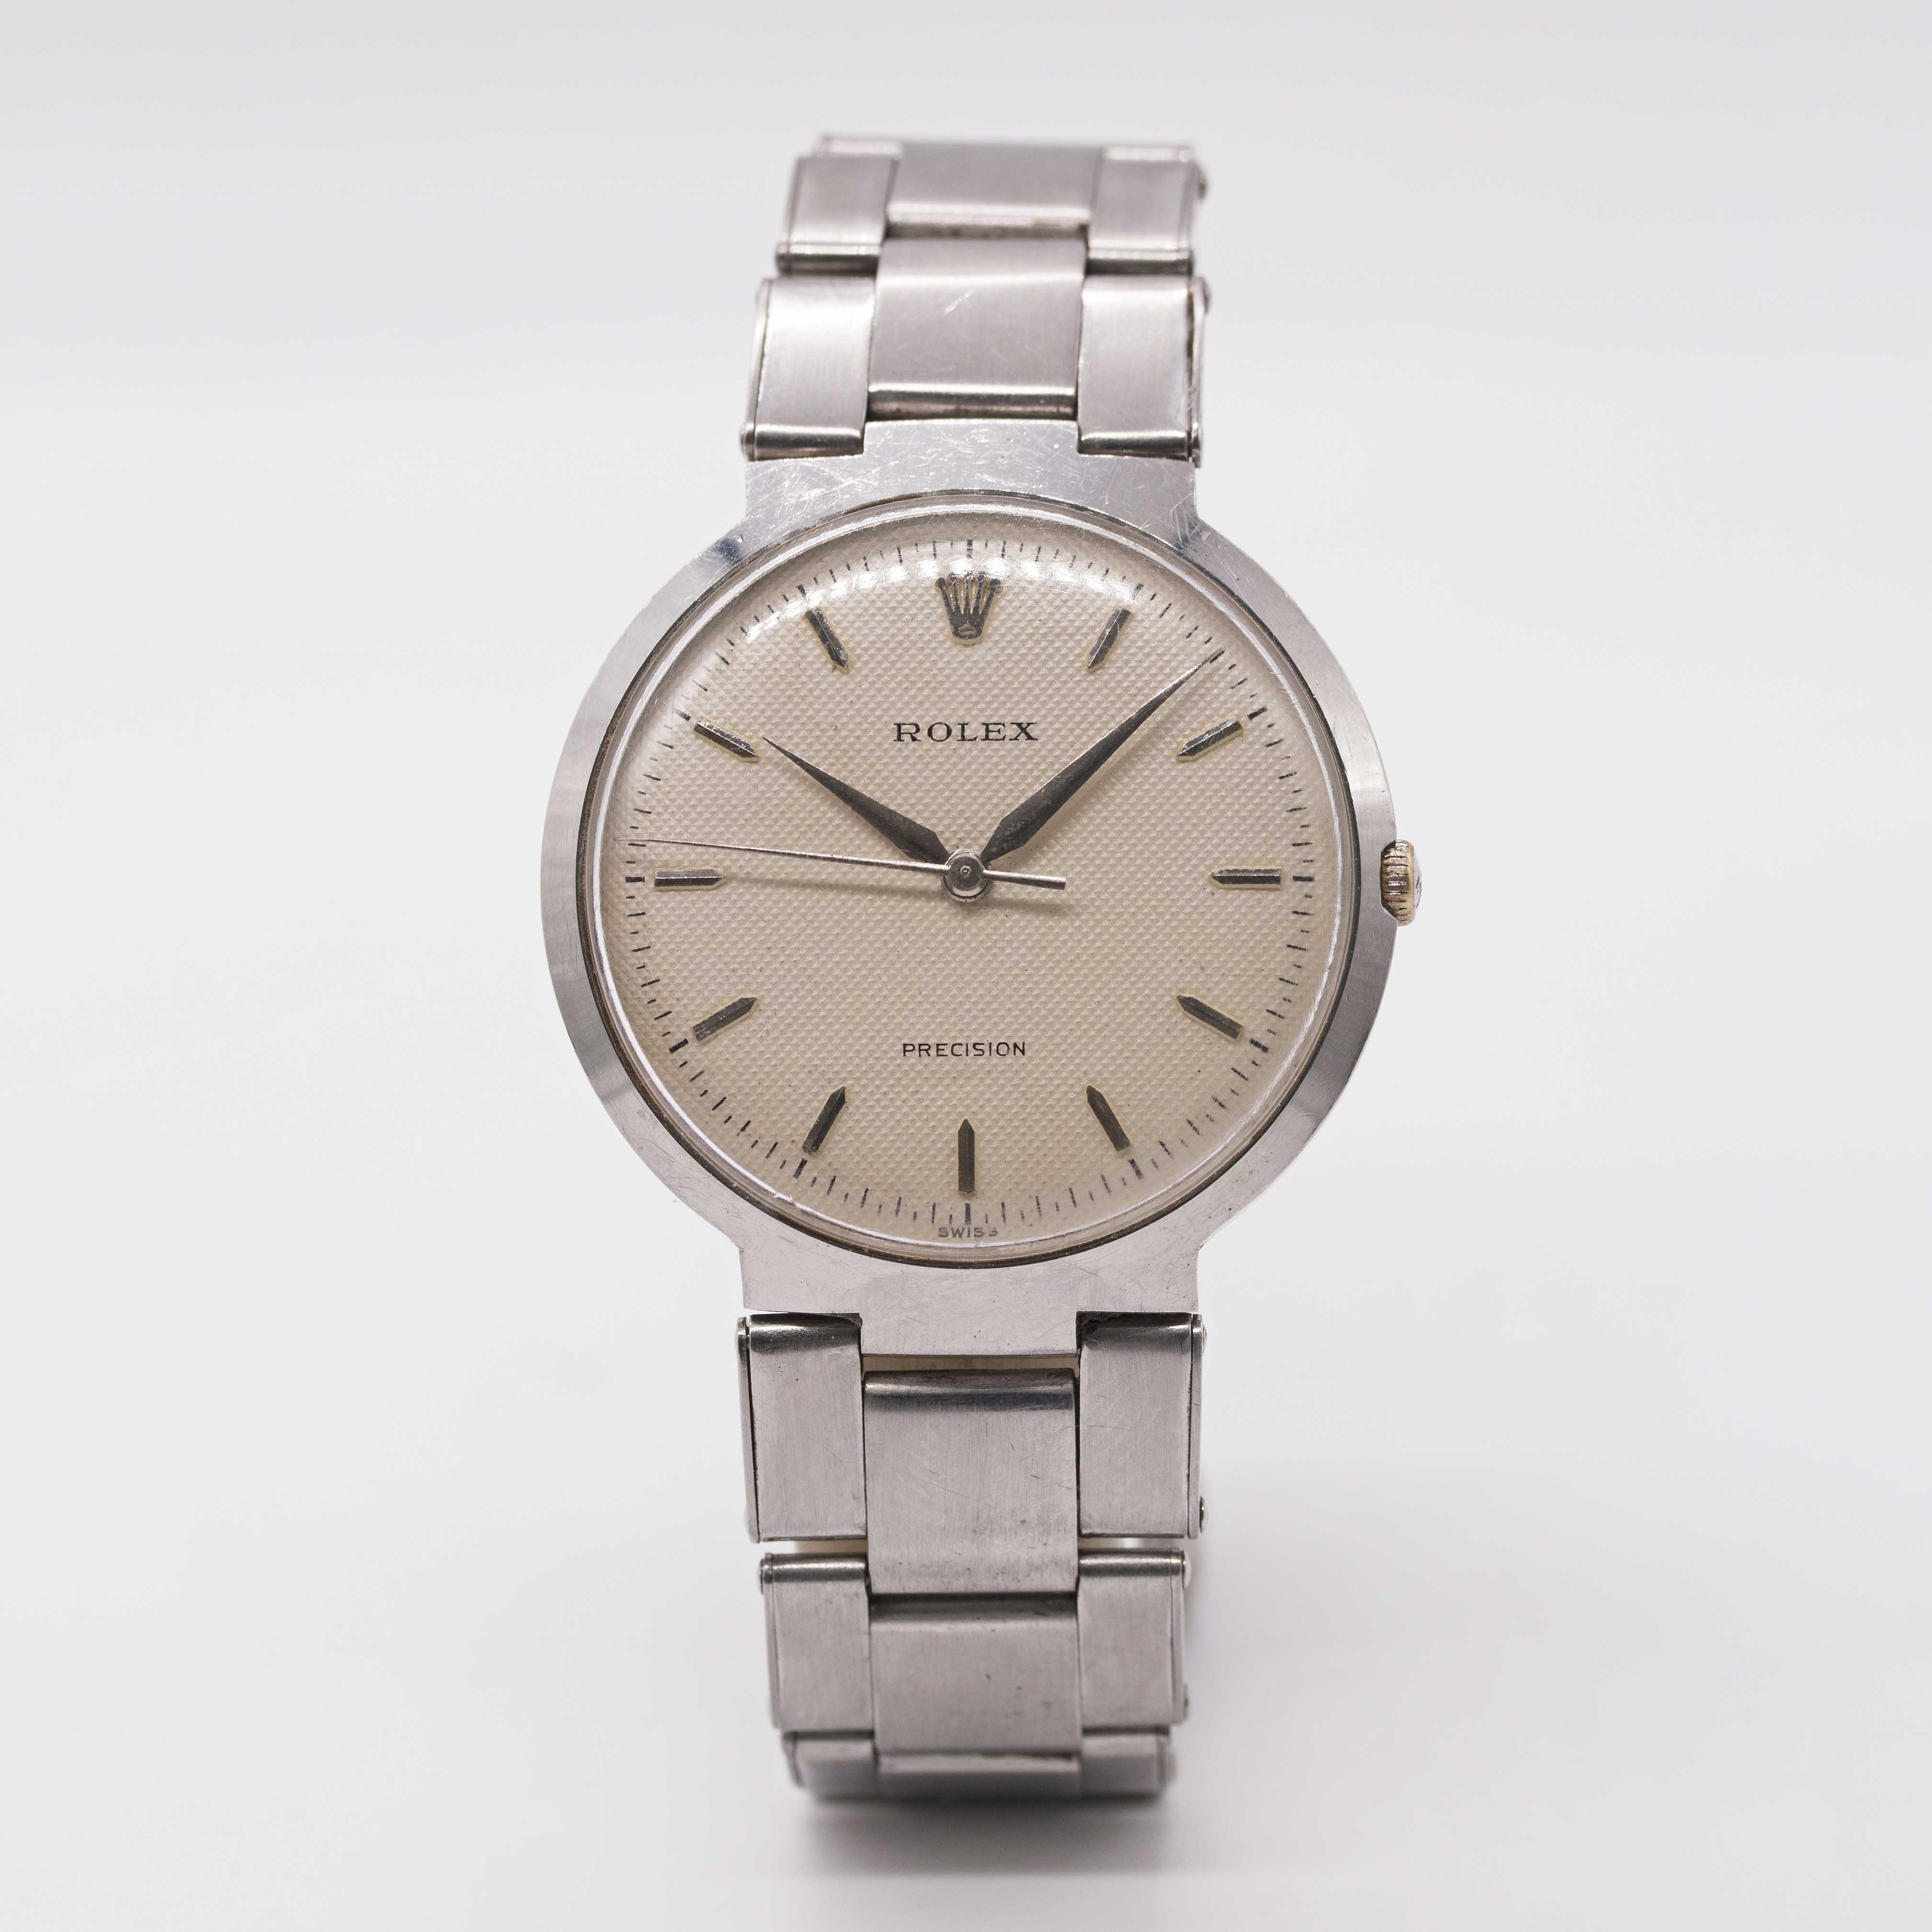 A RARE GENTLEMAN'S STAINLESS STEEL ROLEX "UFO" PRECISION BRACELET WATCH CIRCA 1958, REF. 9083 WITH - Image 3 of 12